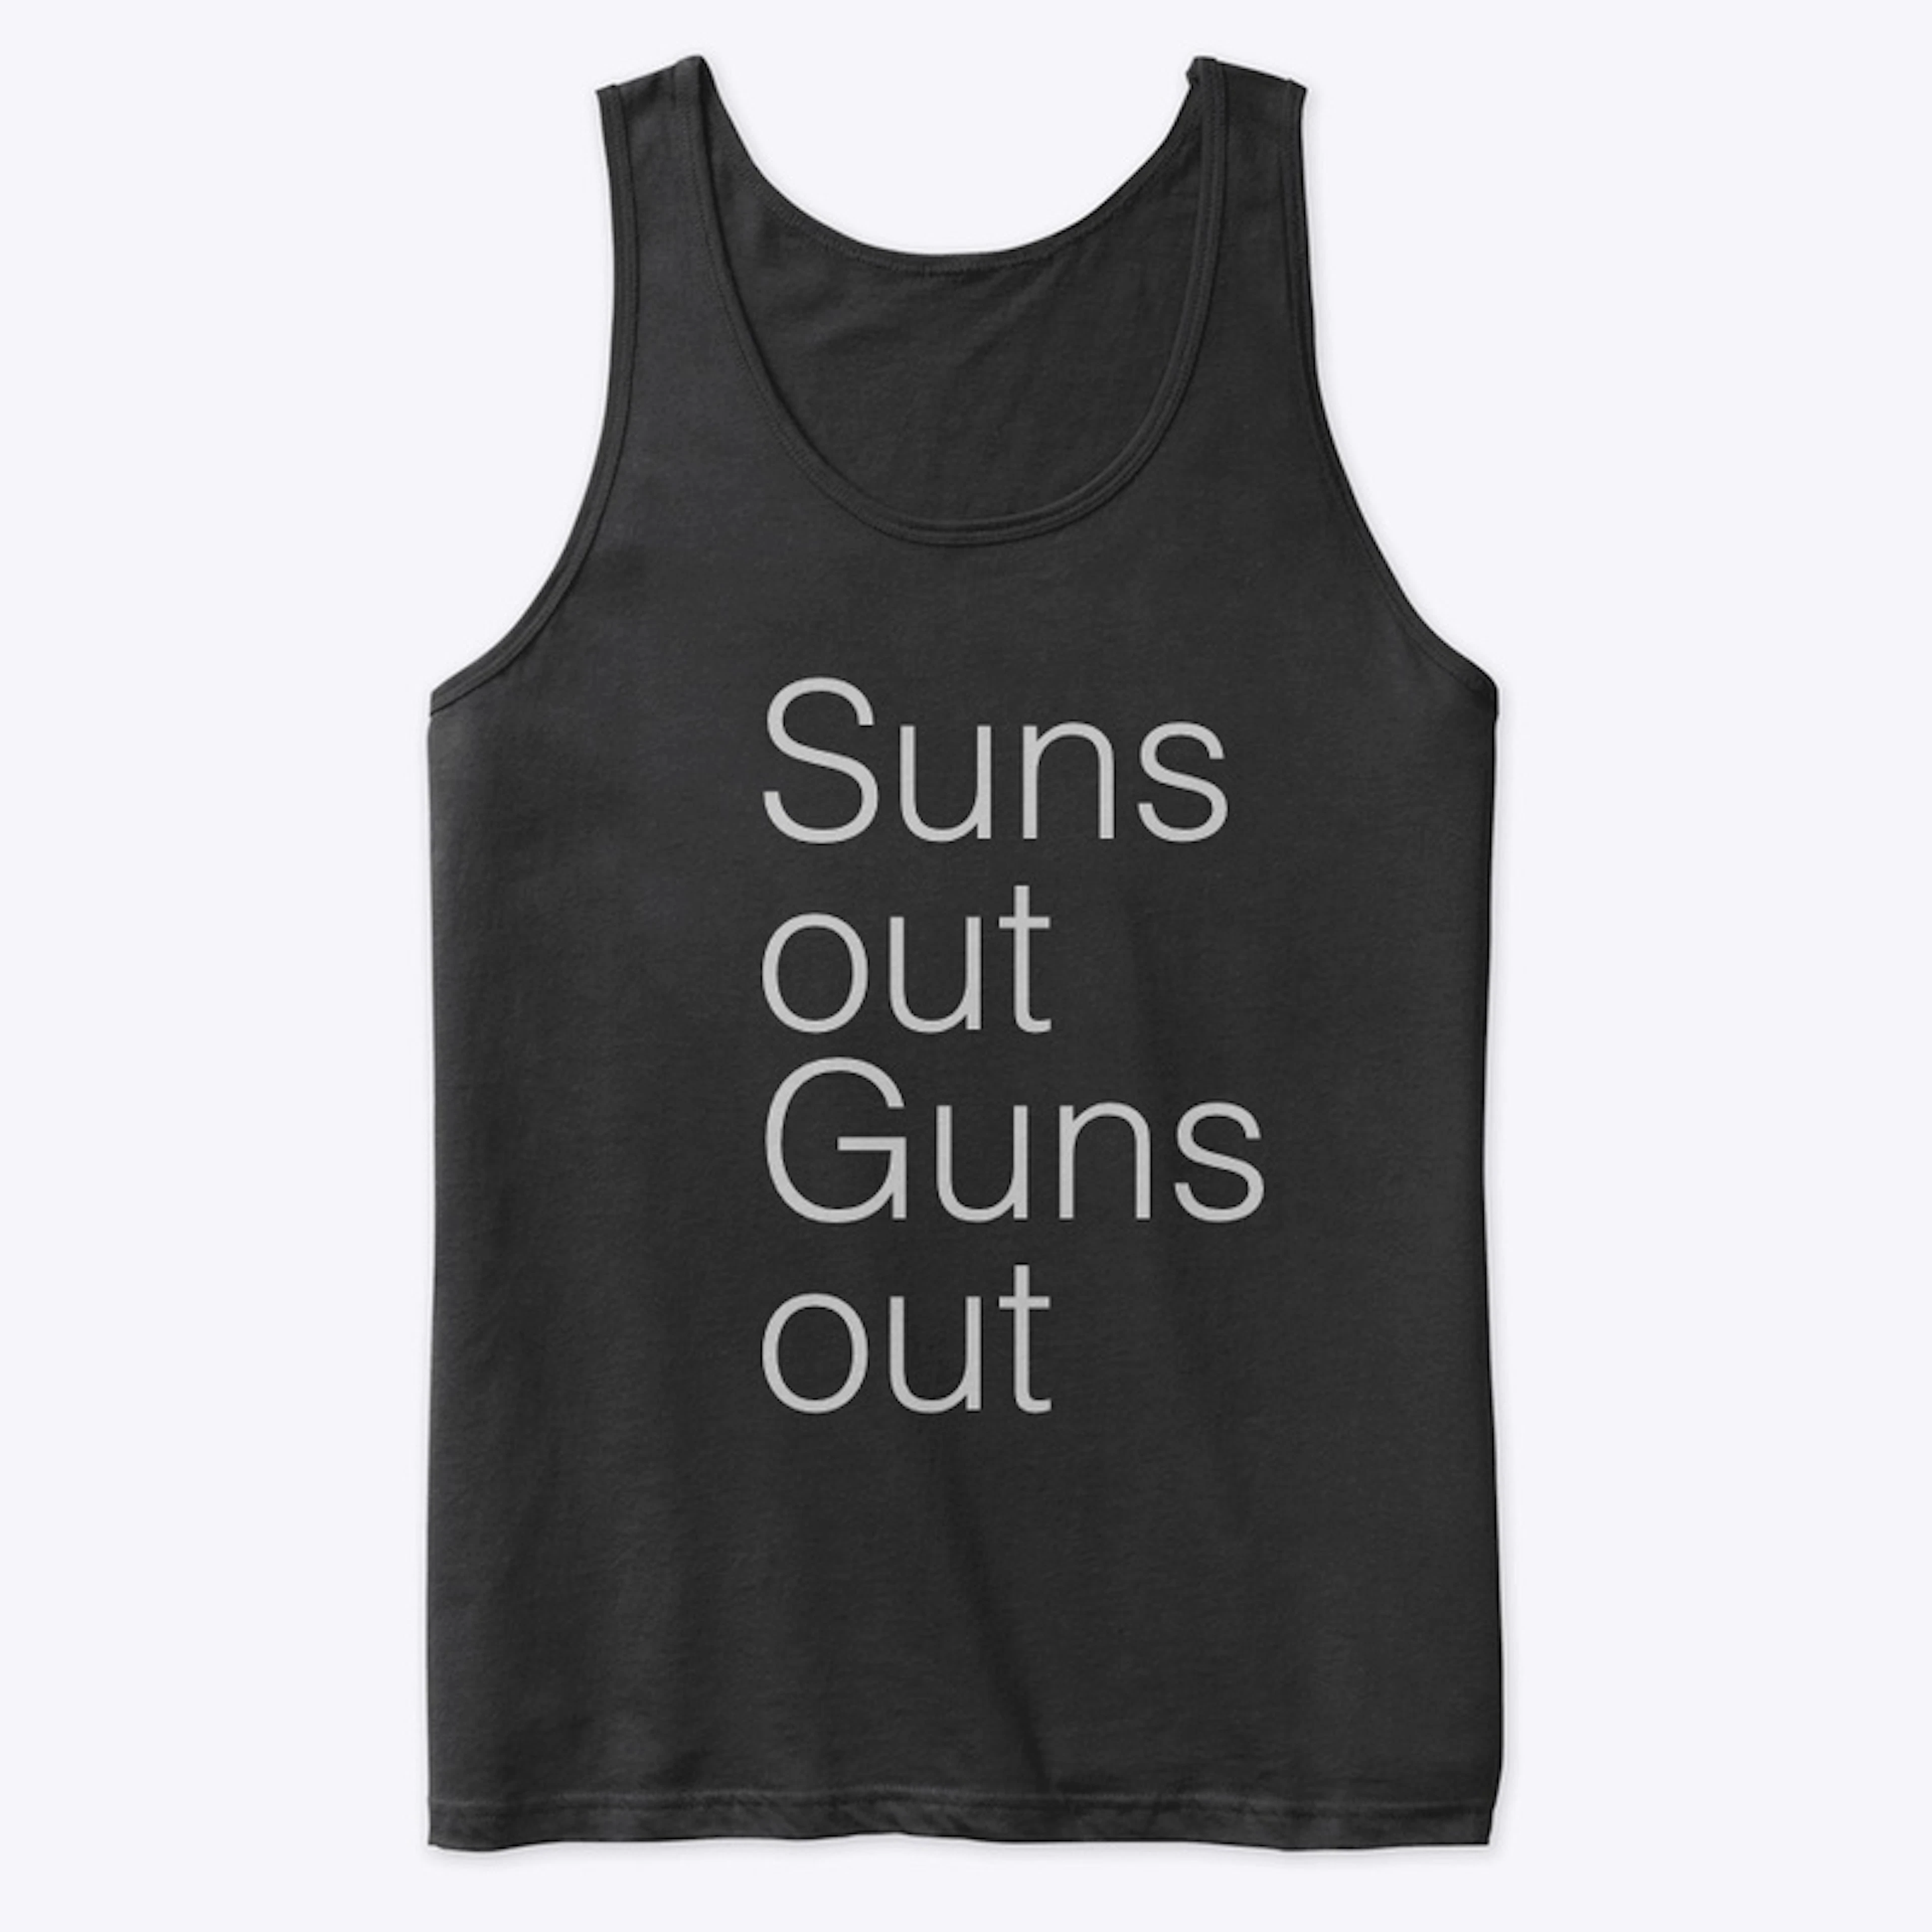 Suns out guns out tee